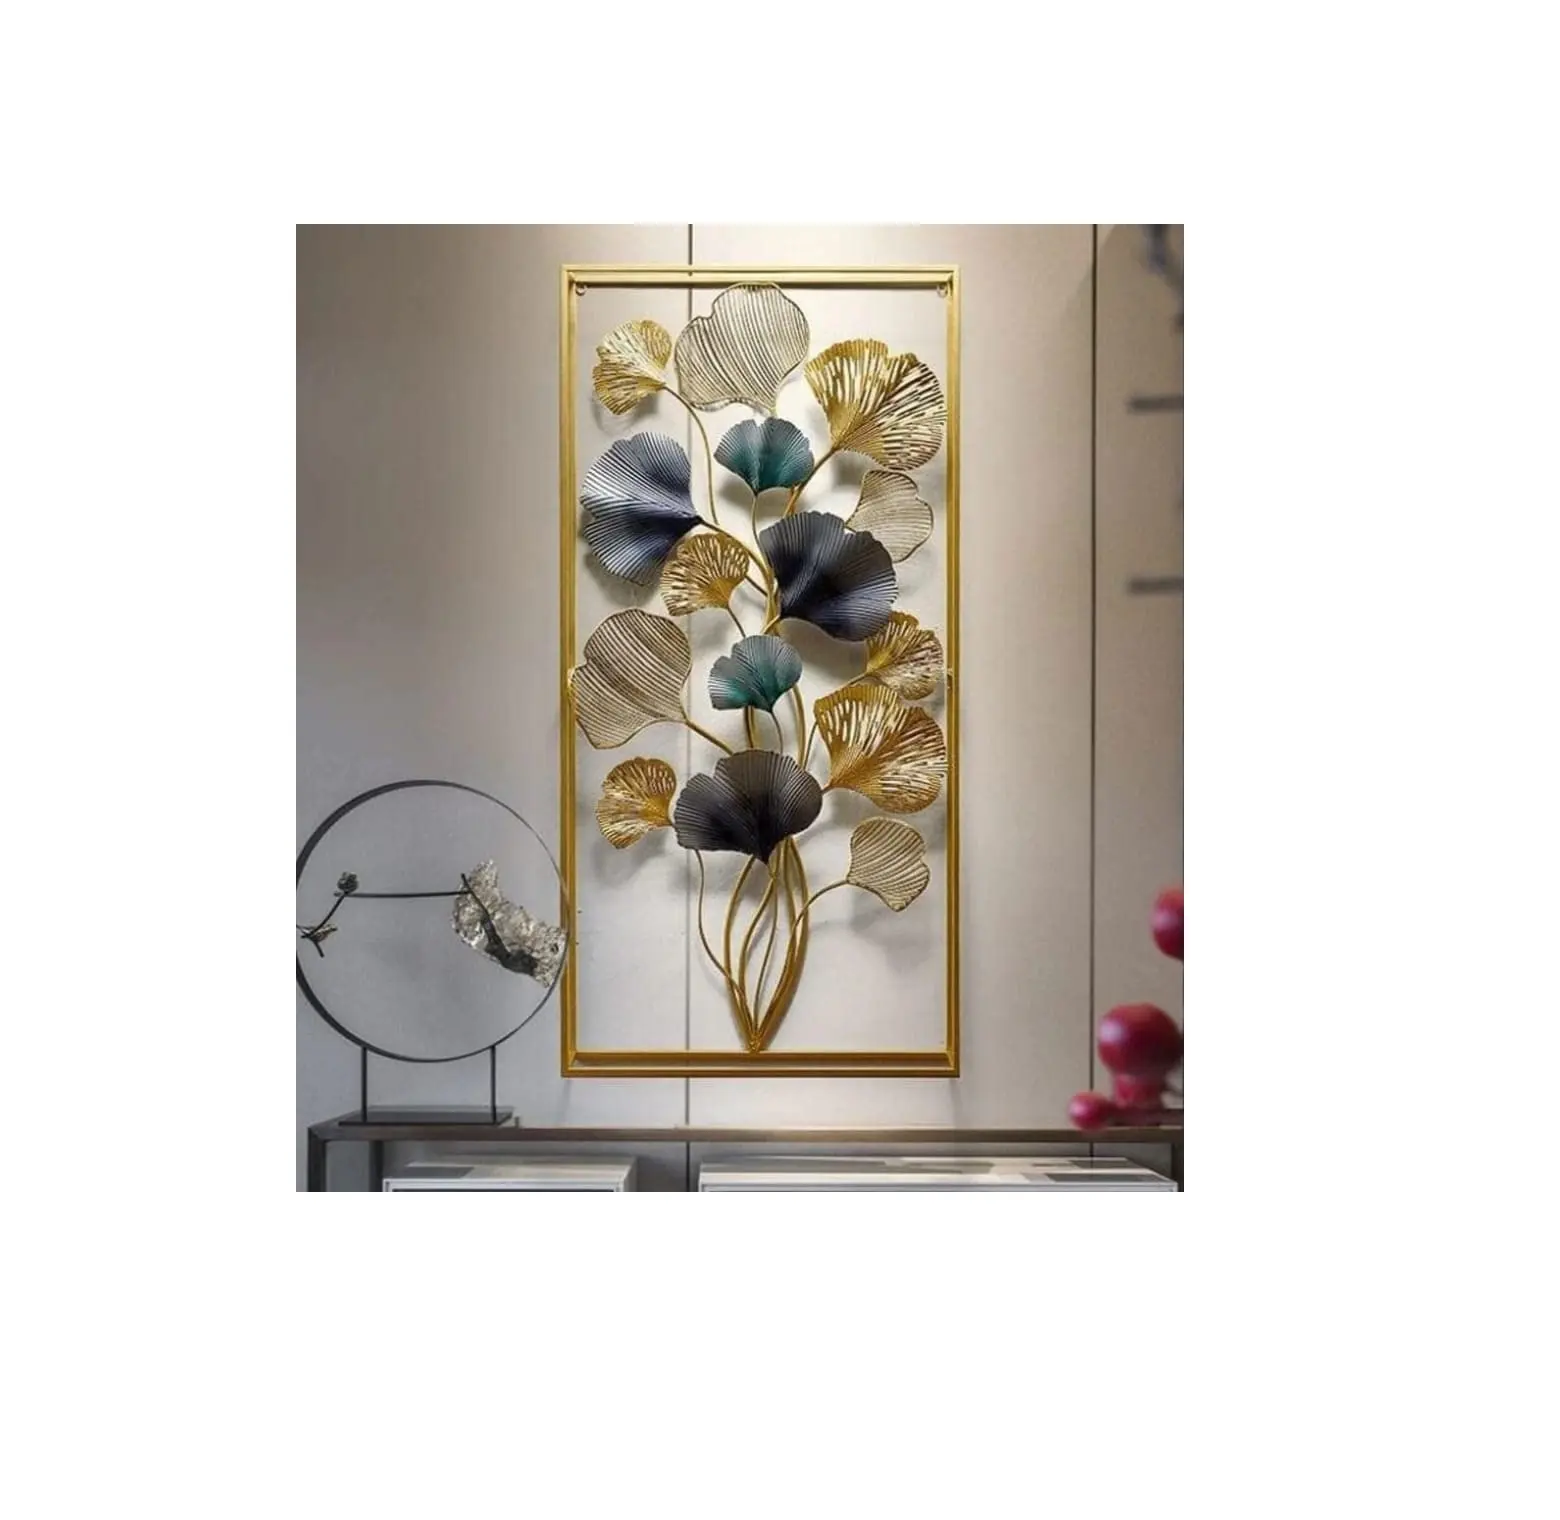 Premium Quality Modern Metal Wall Clock Wall Decor Home Decoration Luxury high quality metal wall arts from Indian Supply